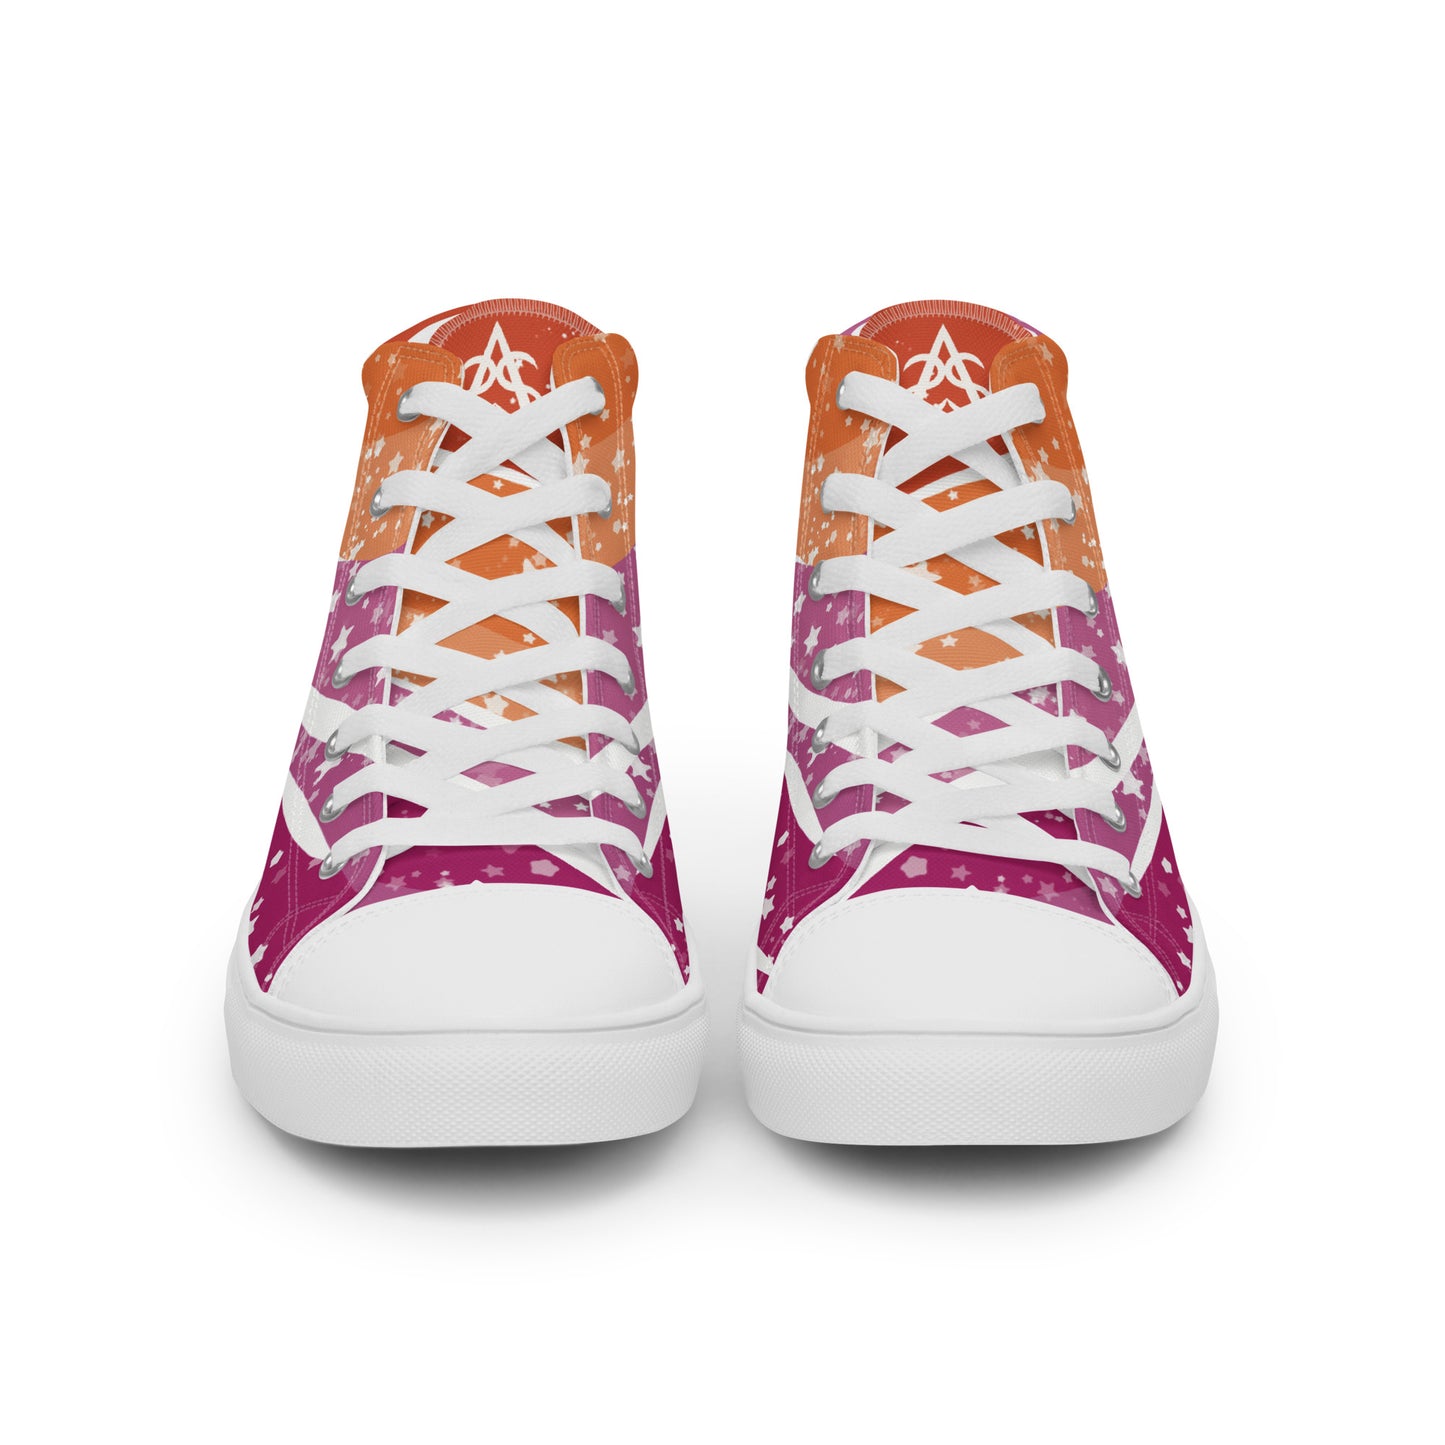 Front view: A pair of high top shoes with ribbons of lesbian flag colors and stars coming from the heel and getting larger across the shoe to the laces.